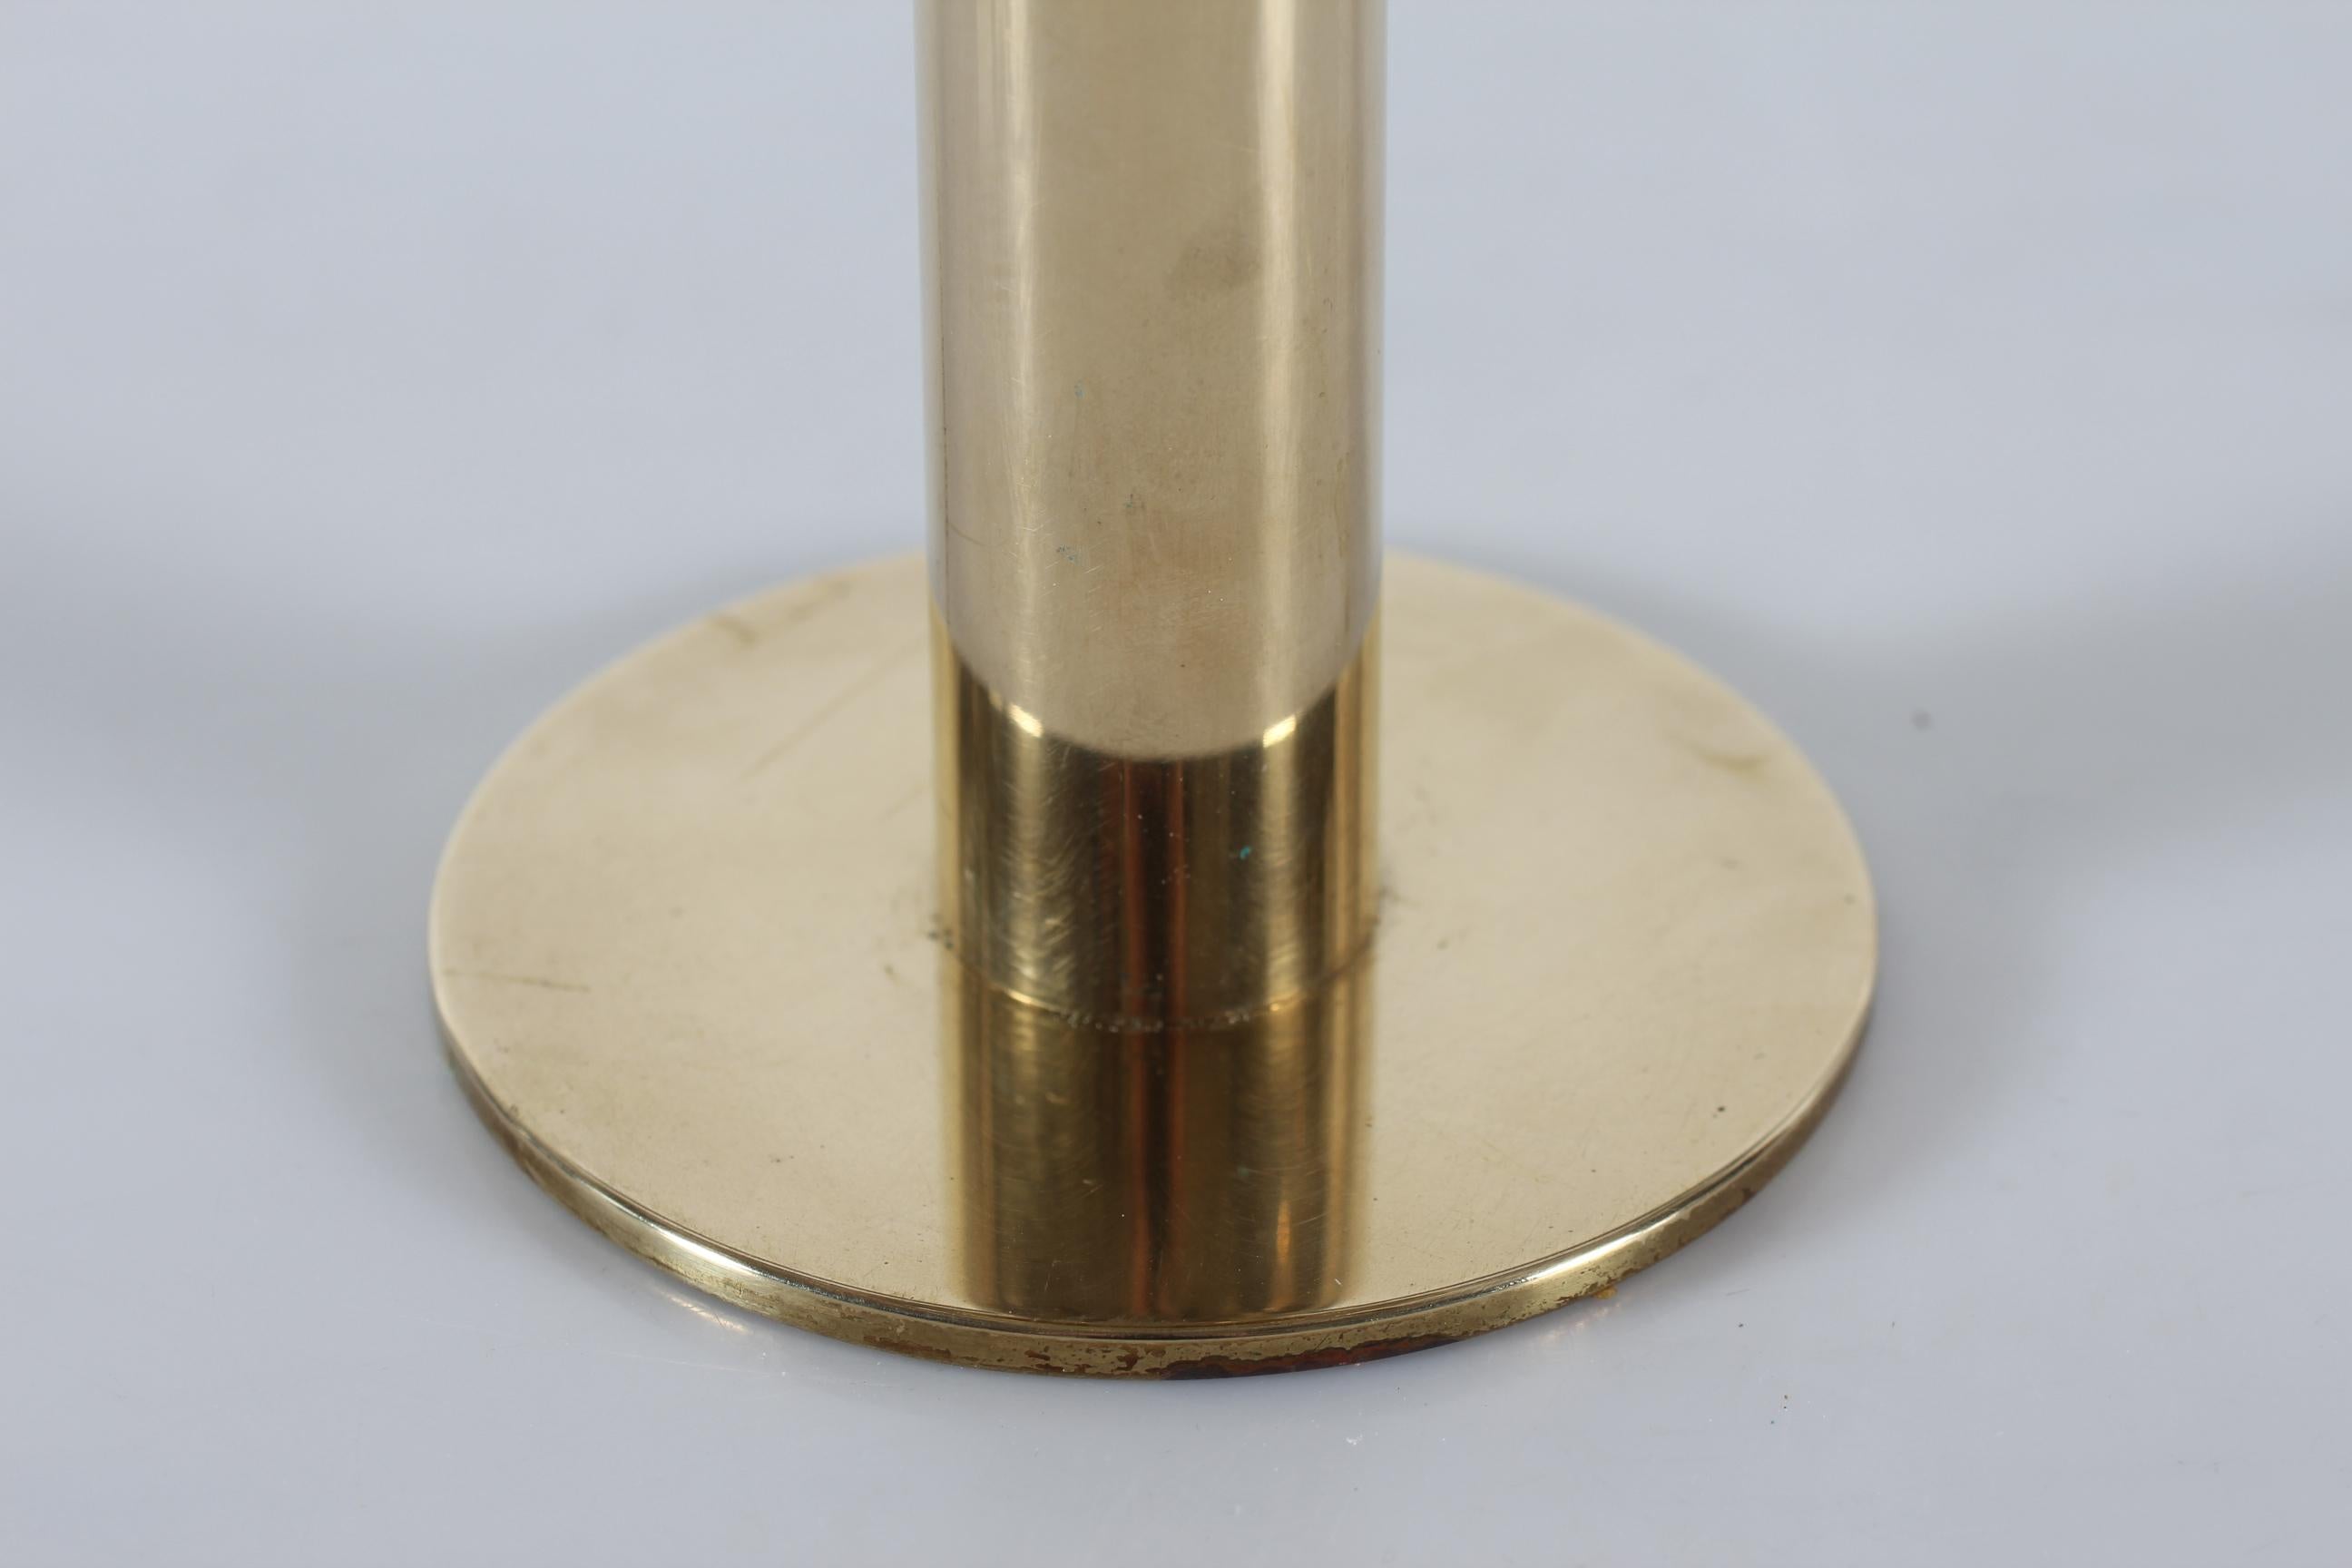 Hans Agne Jakobsson hurricane candle holder model no. L102/32.
The hurricane is made of solid brass with a mouth blown smoke colored glass globe.
Made by Hans Agne Jakobsson A/B in Markaryd, Sweden in the 1960s.
The candle is placed inside the